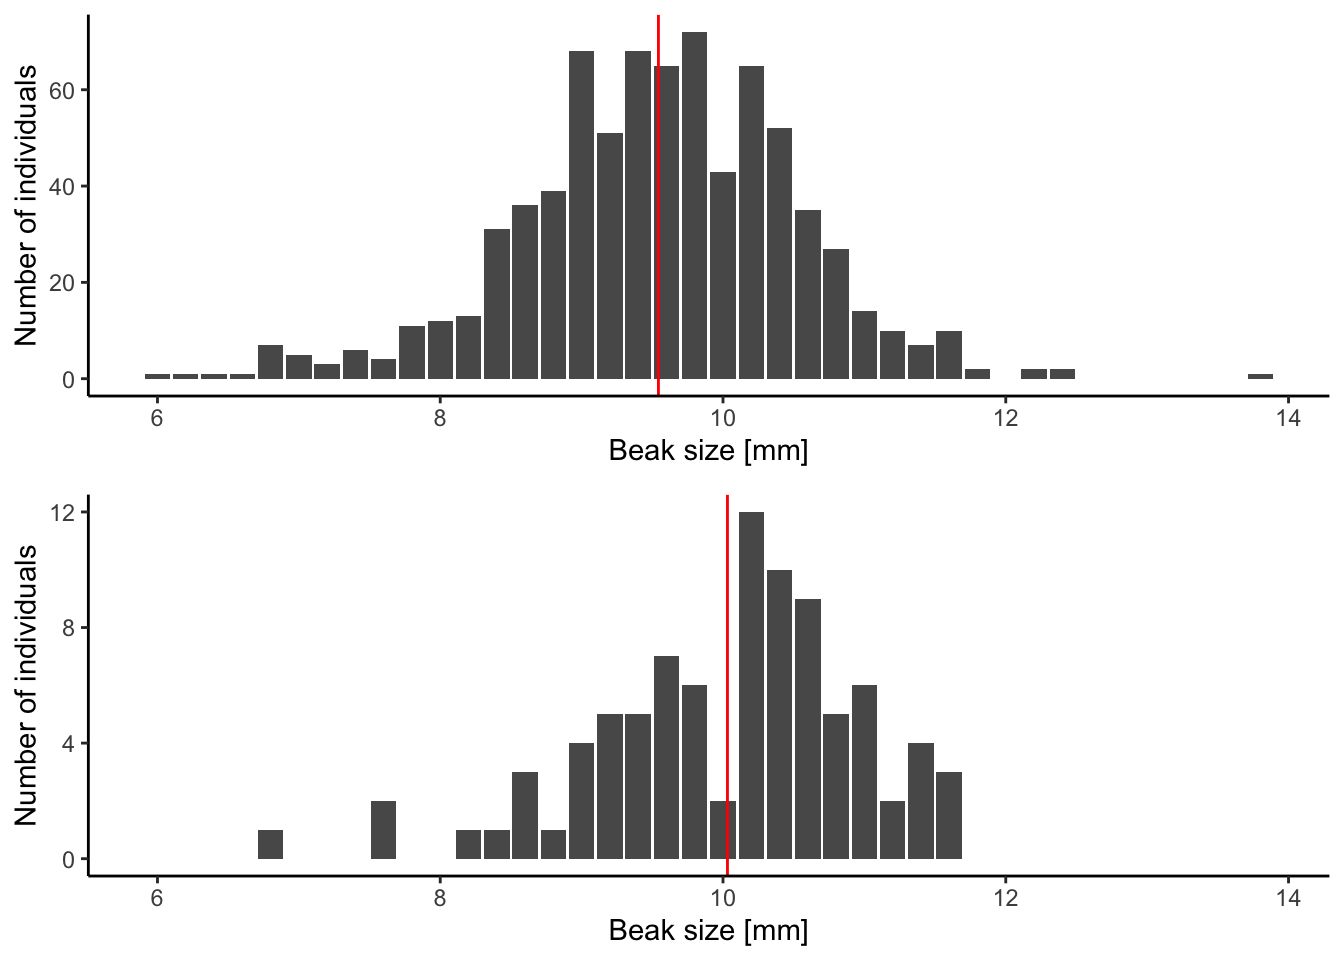 Frequency histograms showing beak size variation in the finch population before the drought (top) and in the surviving individuals after the drought (bottom). The vertical red lines represent the mean beak size in each set. The beak size of the average survivor was slightly higher than the population average prior to the drought, indicating that natural selection happened. [Data](data/3_beak_size_variation.csv) from Boag and Grant (1984).